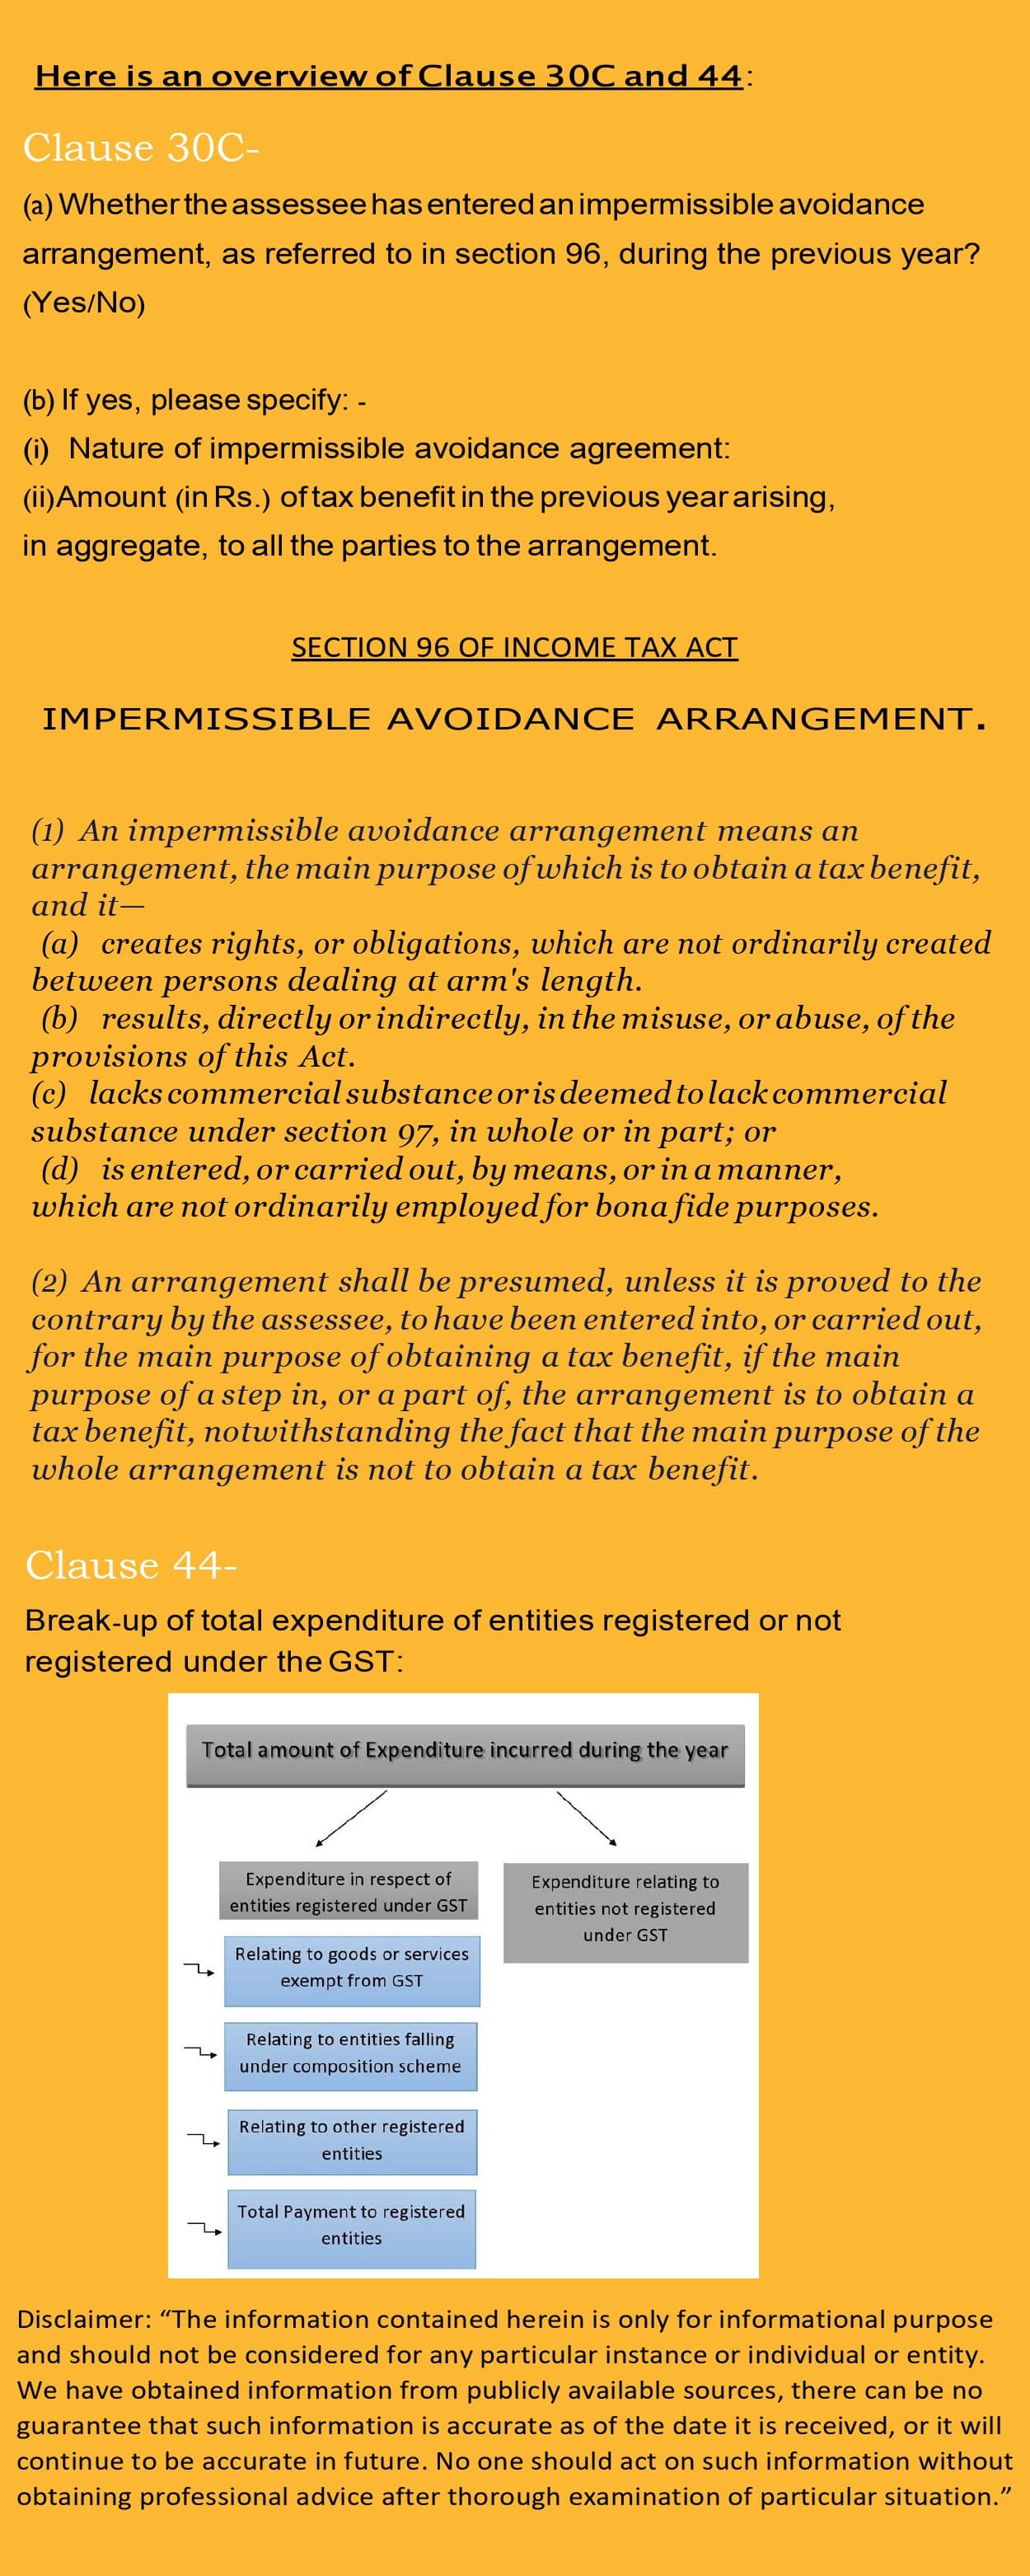 applicability-of-clauses-30c-and-44